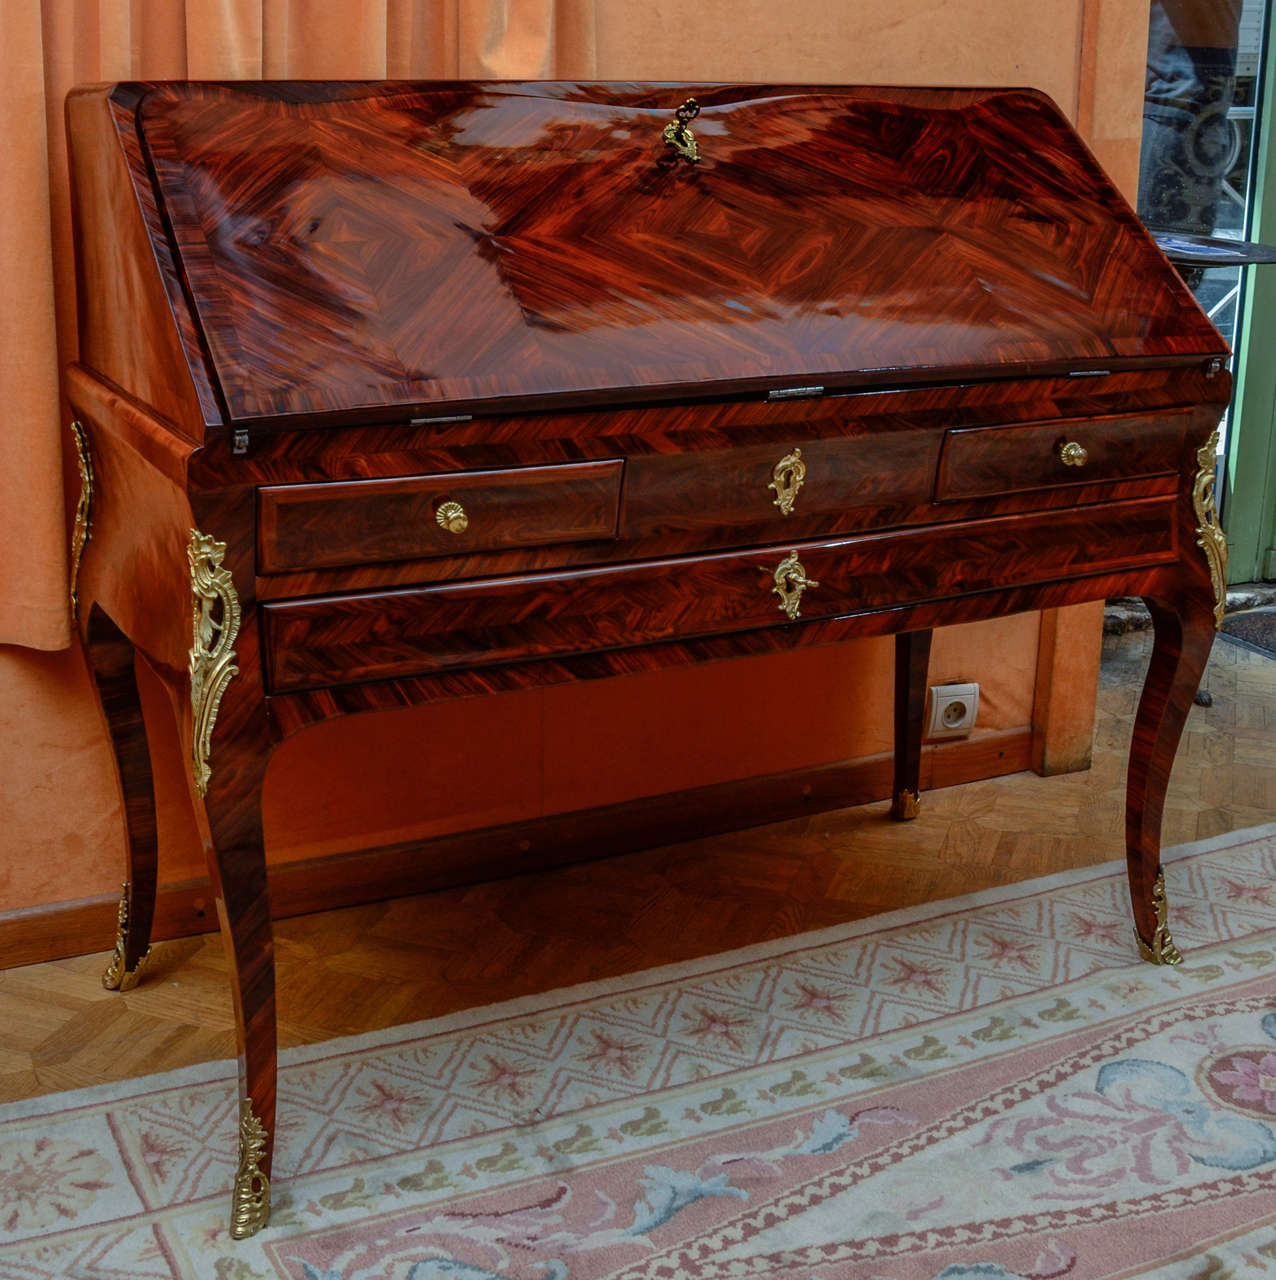 A Louis XV  ormoulu mounted bureau en pente,  the fall front opening to a writing interior containing drawers and secret, on cabriole legs.